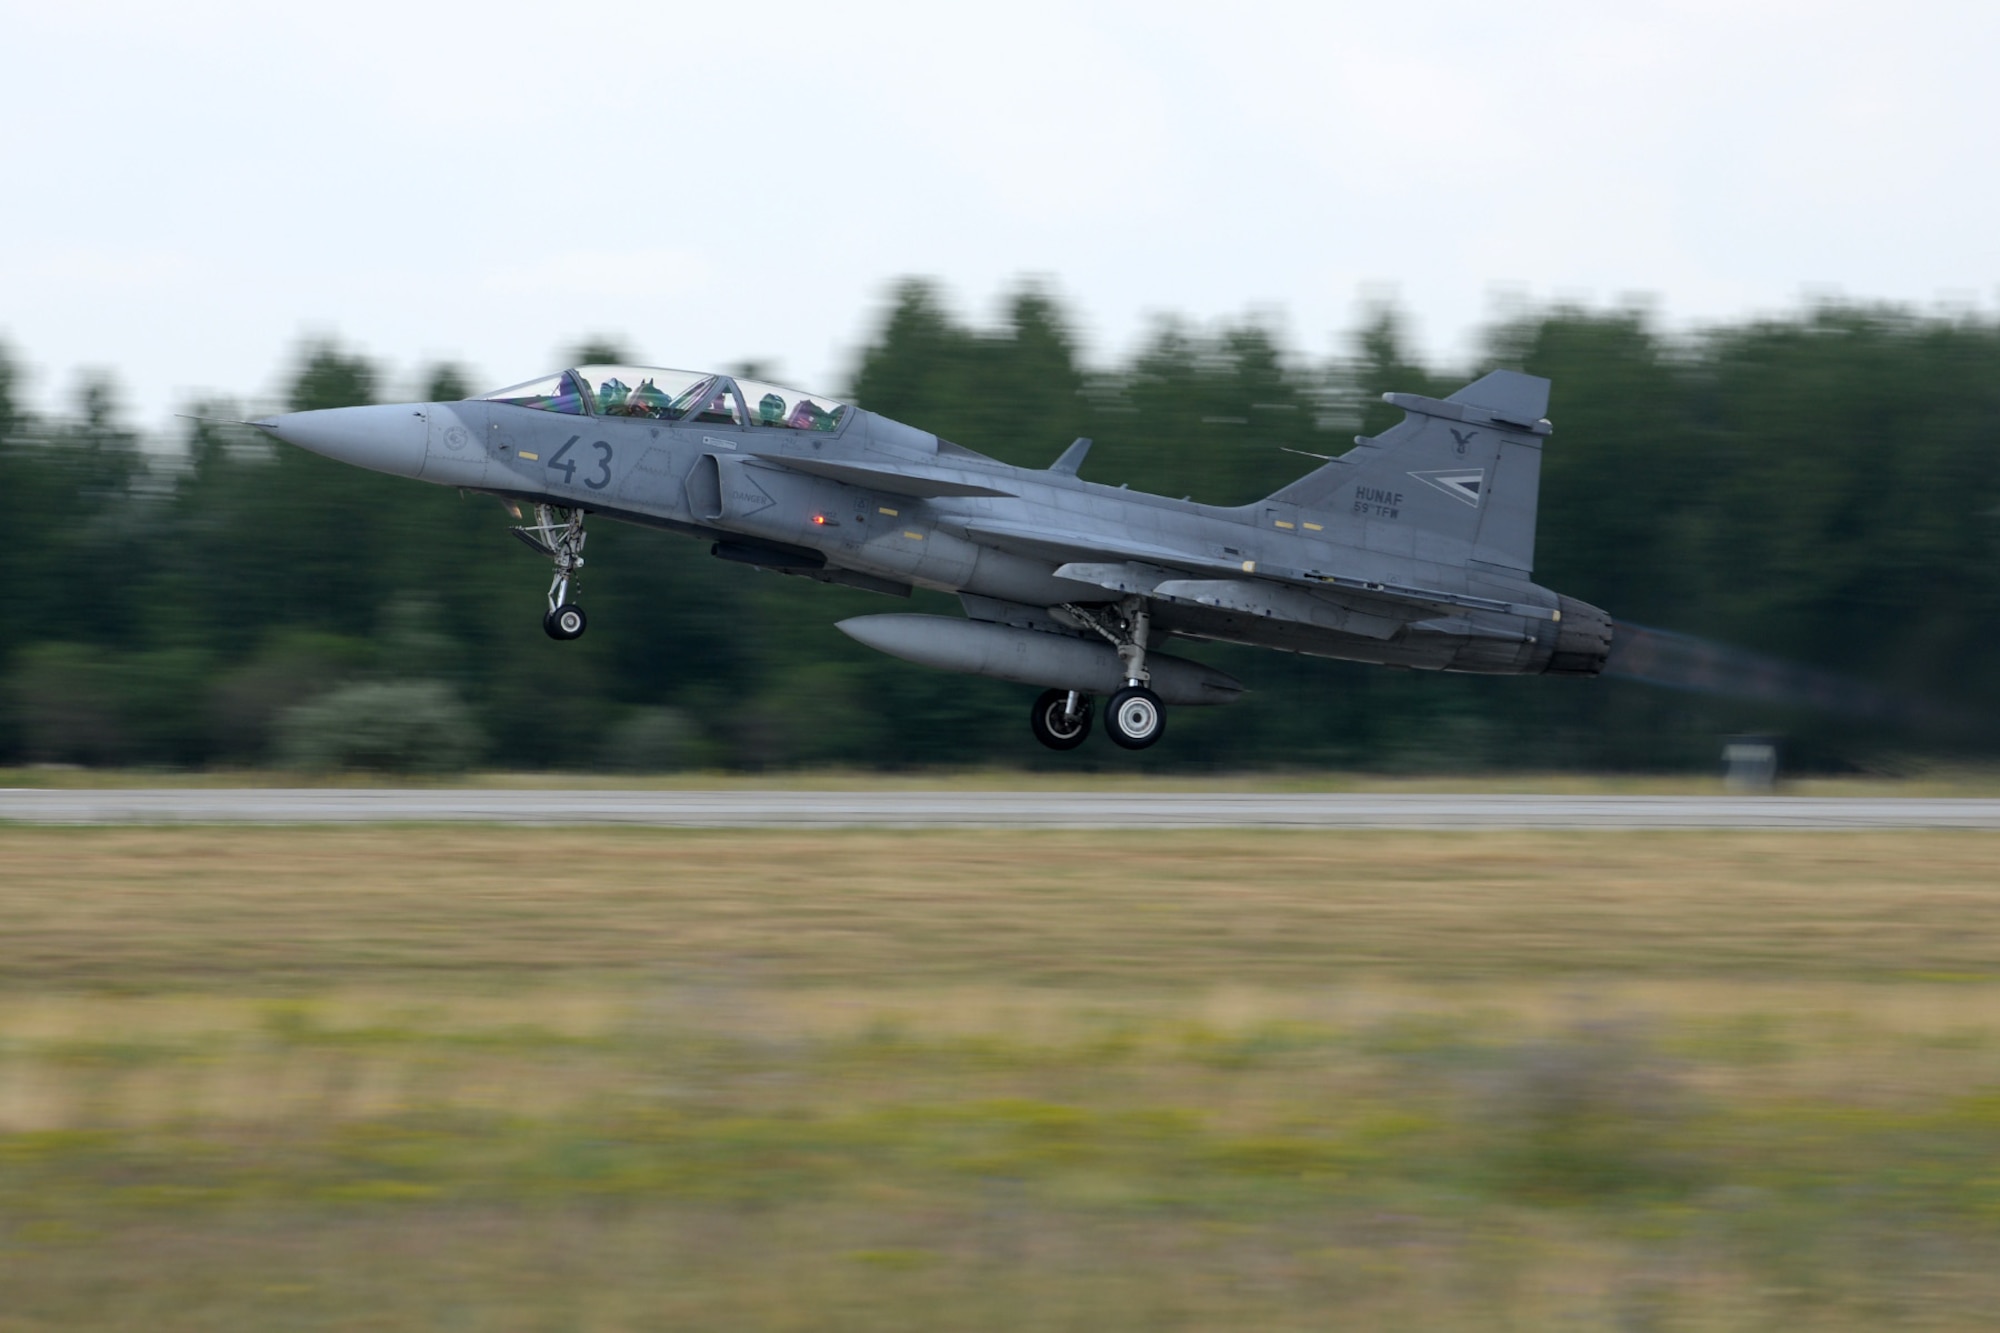 A JAS-39 Gripen takes off June 24, 2015, during air refueling familiarization training on Kecskemét air base, Hungary. Hungarian, U.S. and Swedish air force personnel met for a two-week familiarization period enabling the Hungarian JAS-39 Gripen pilots to successfully perform air refueling for the first time. (U.S. Air Force photo by Senior Airman Kate Thornton/Released)